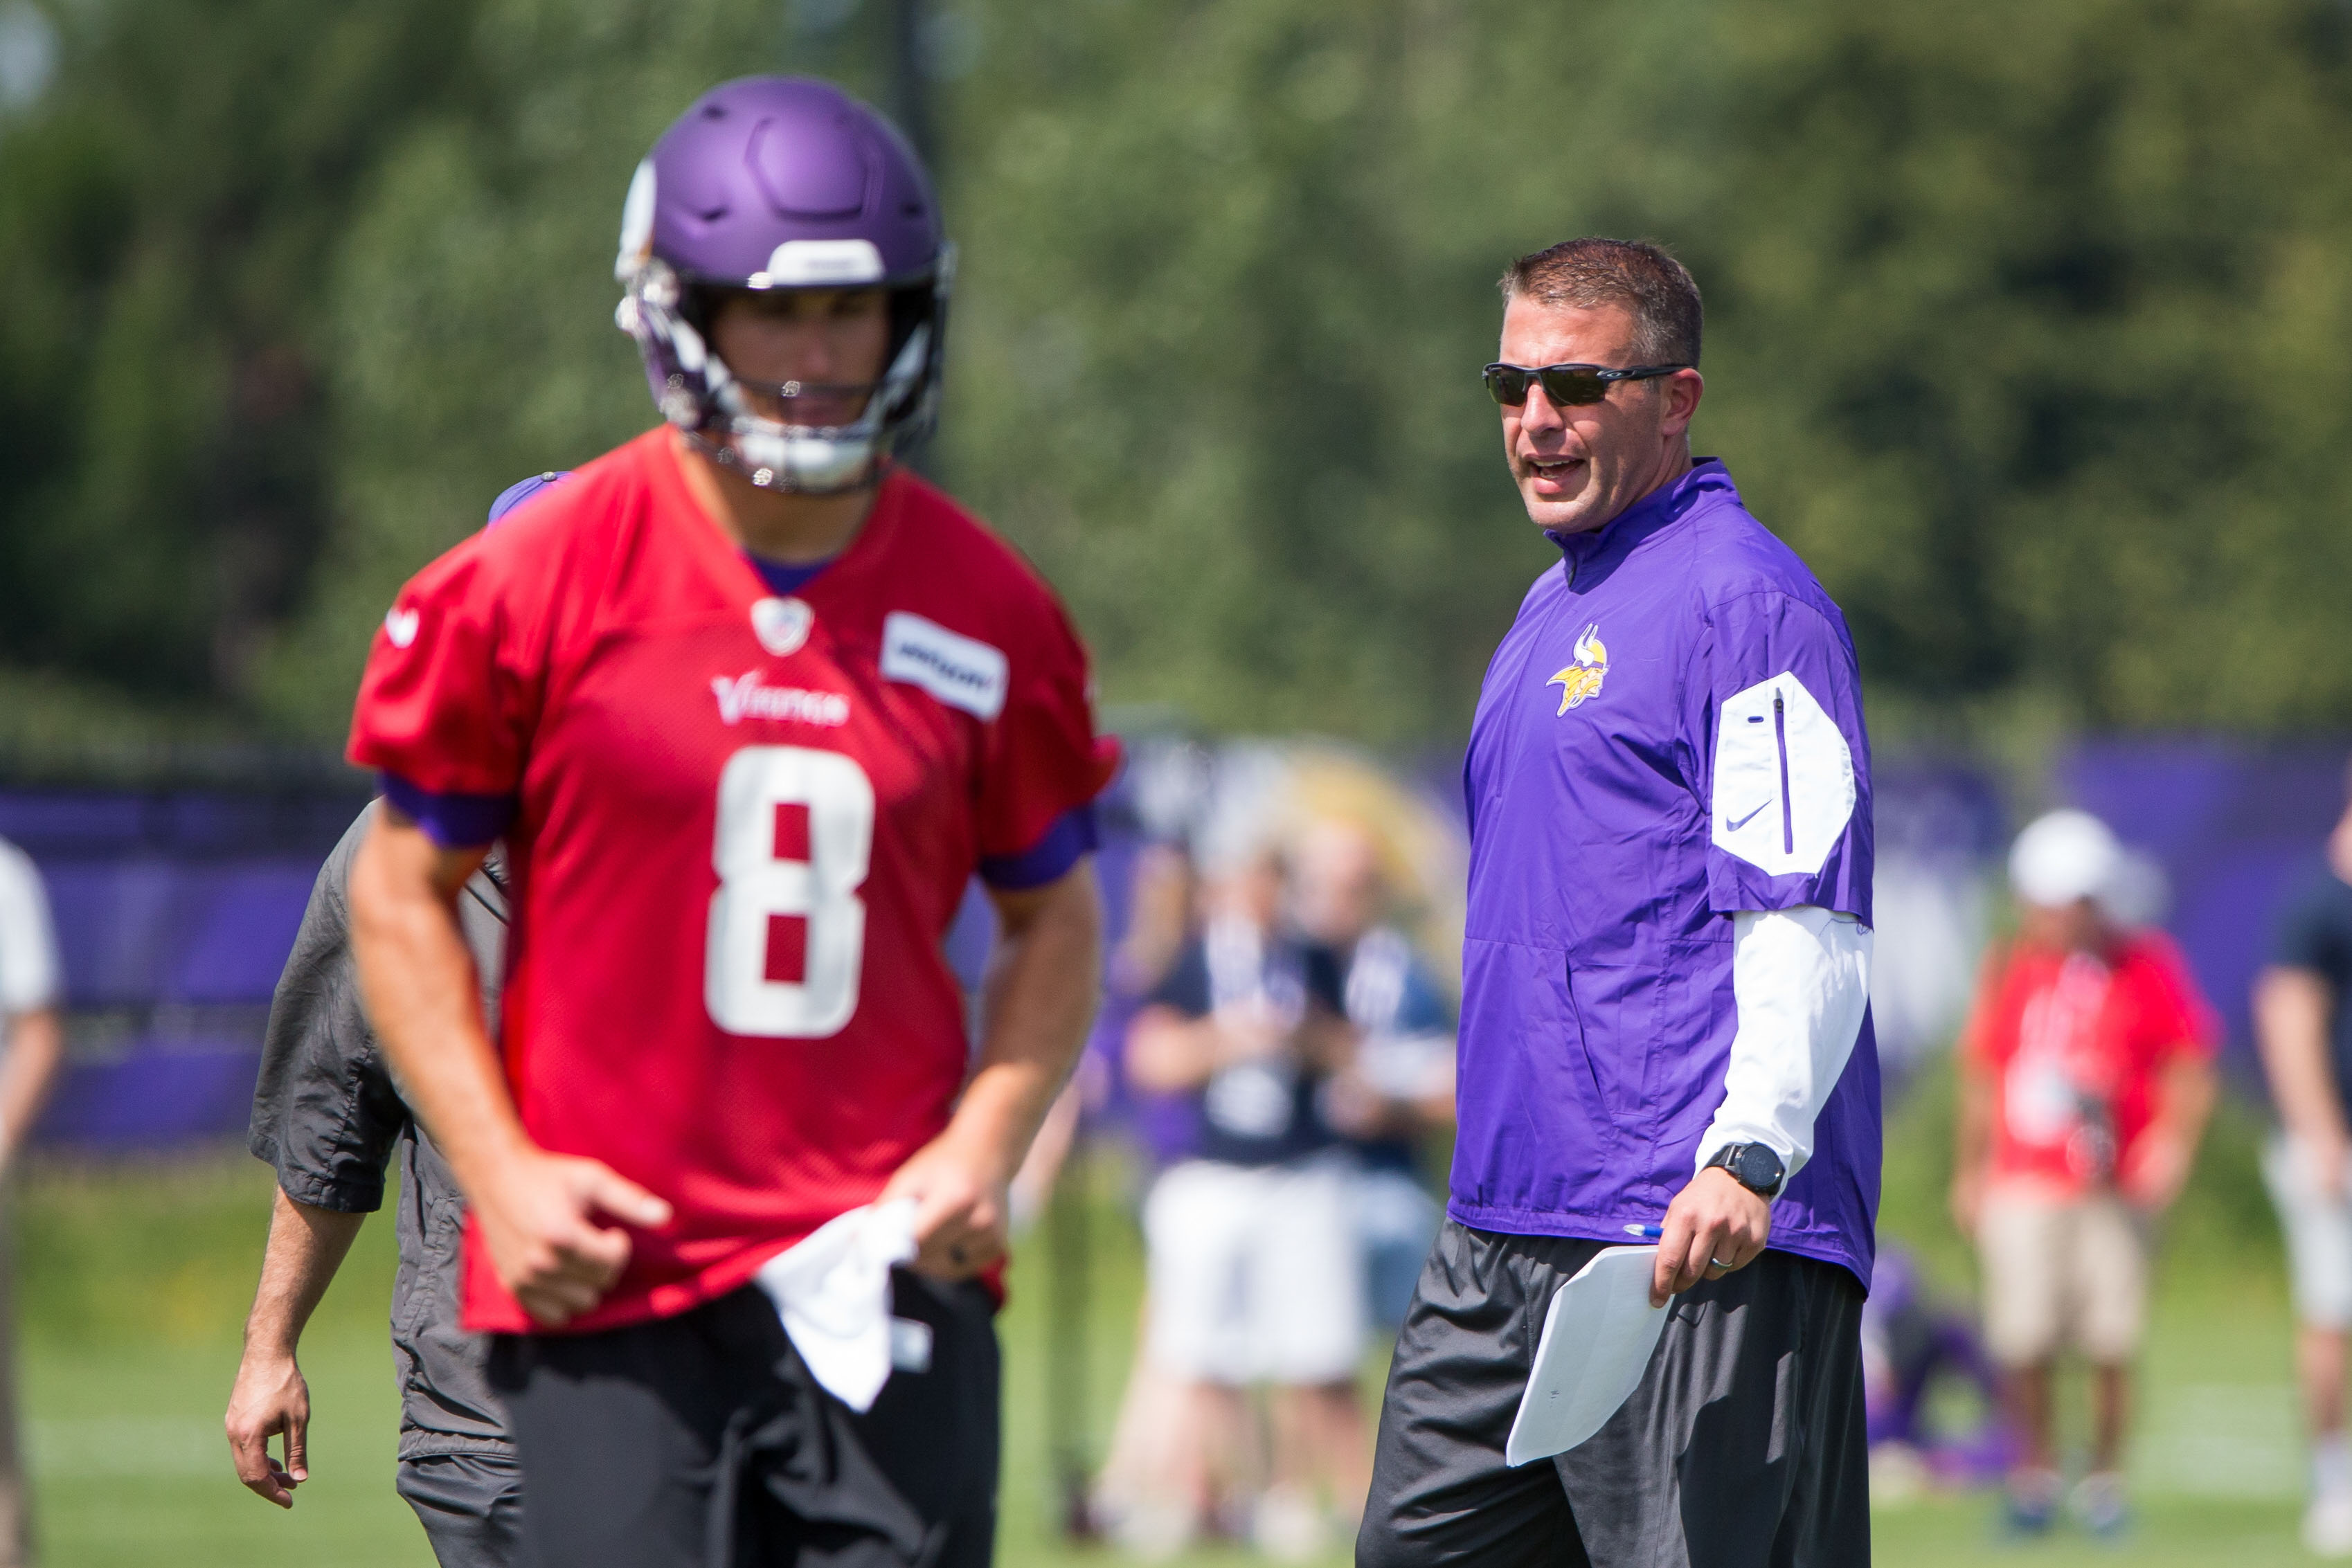 Vikings Fans Aren’t Thrilled With John DeFilippo (Who was Just Fired)